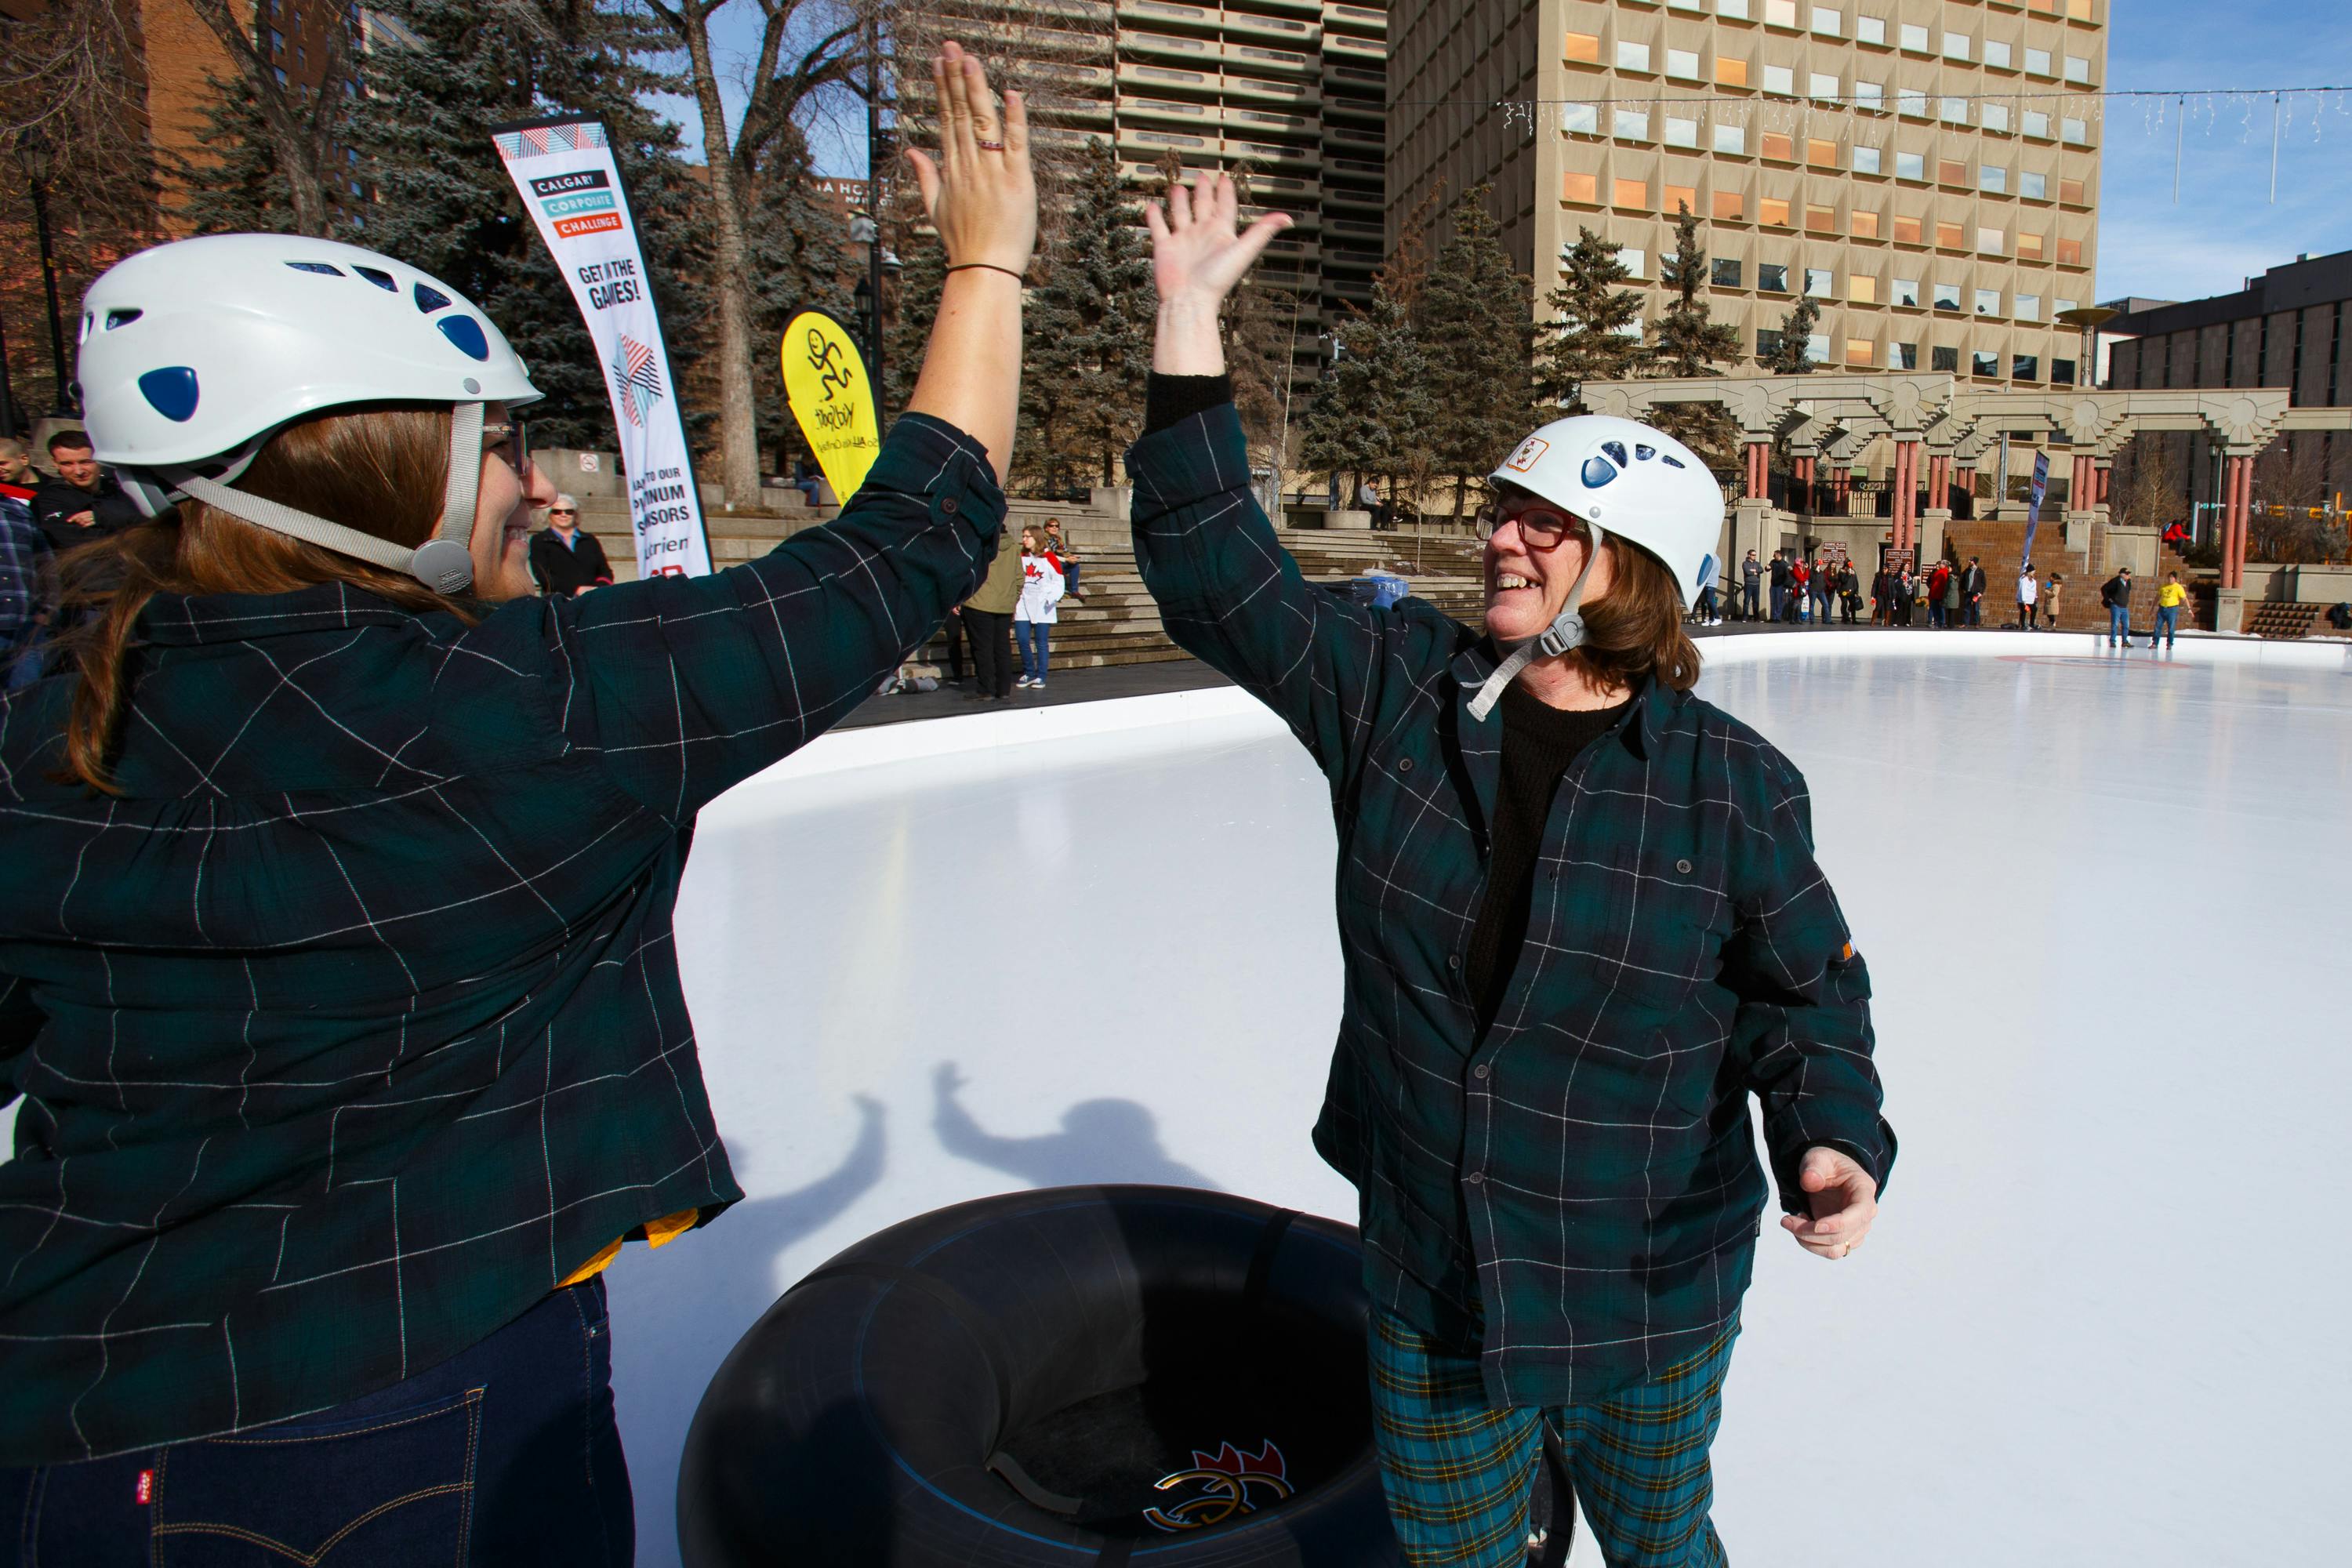 two women high-fiving at Human Bonspiel event